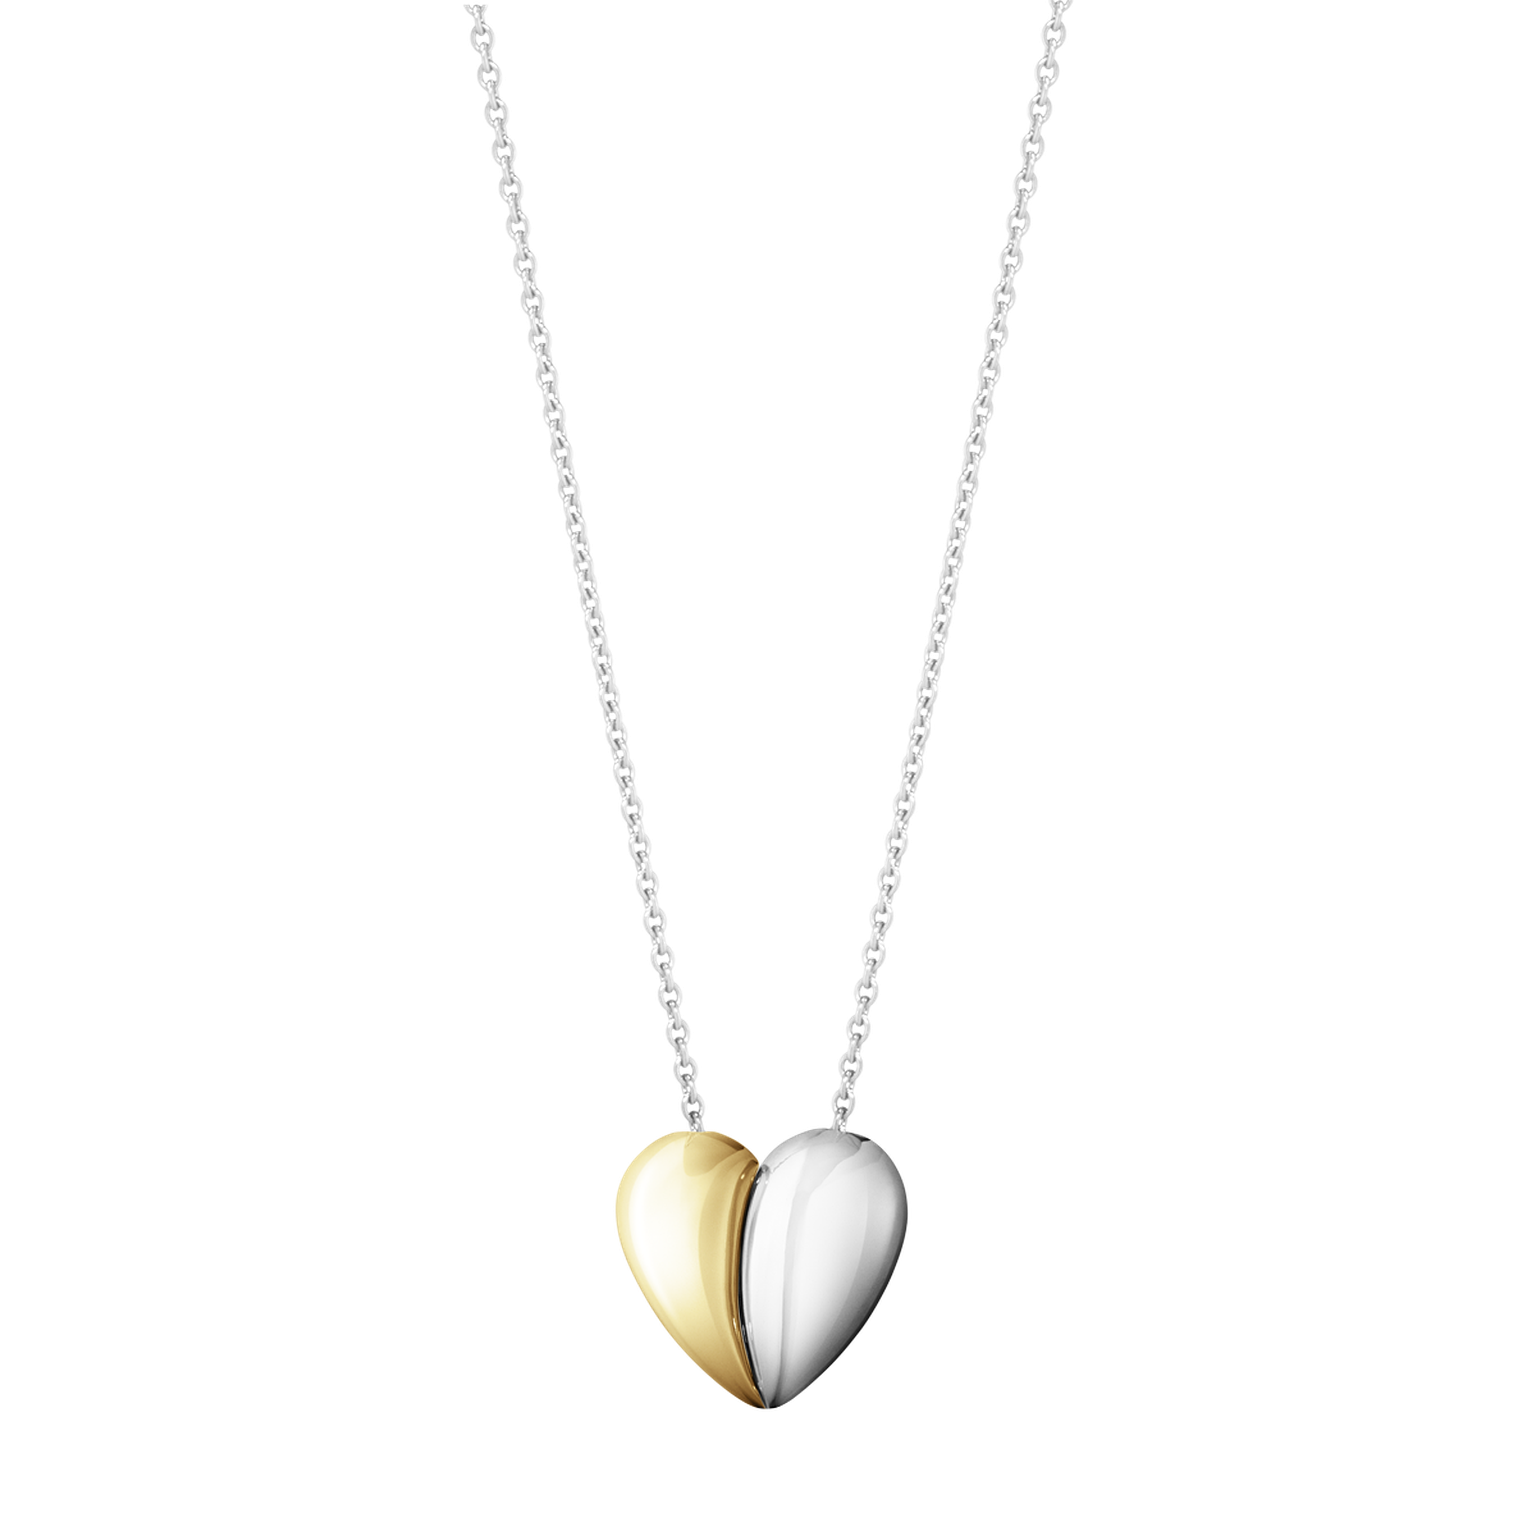 Hearts necklace by Georg Jensen